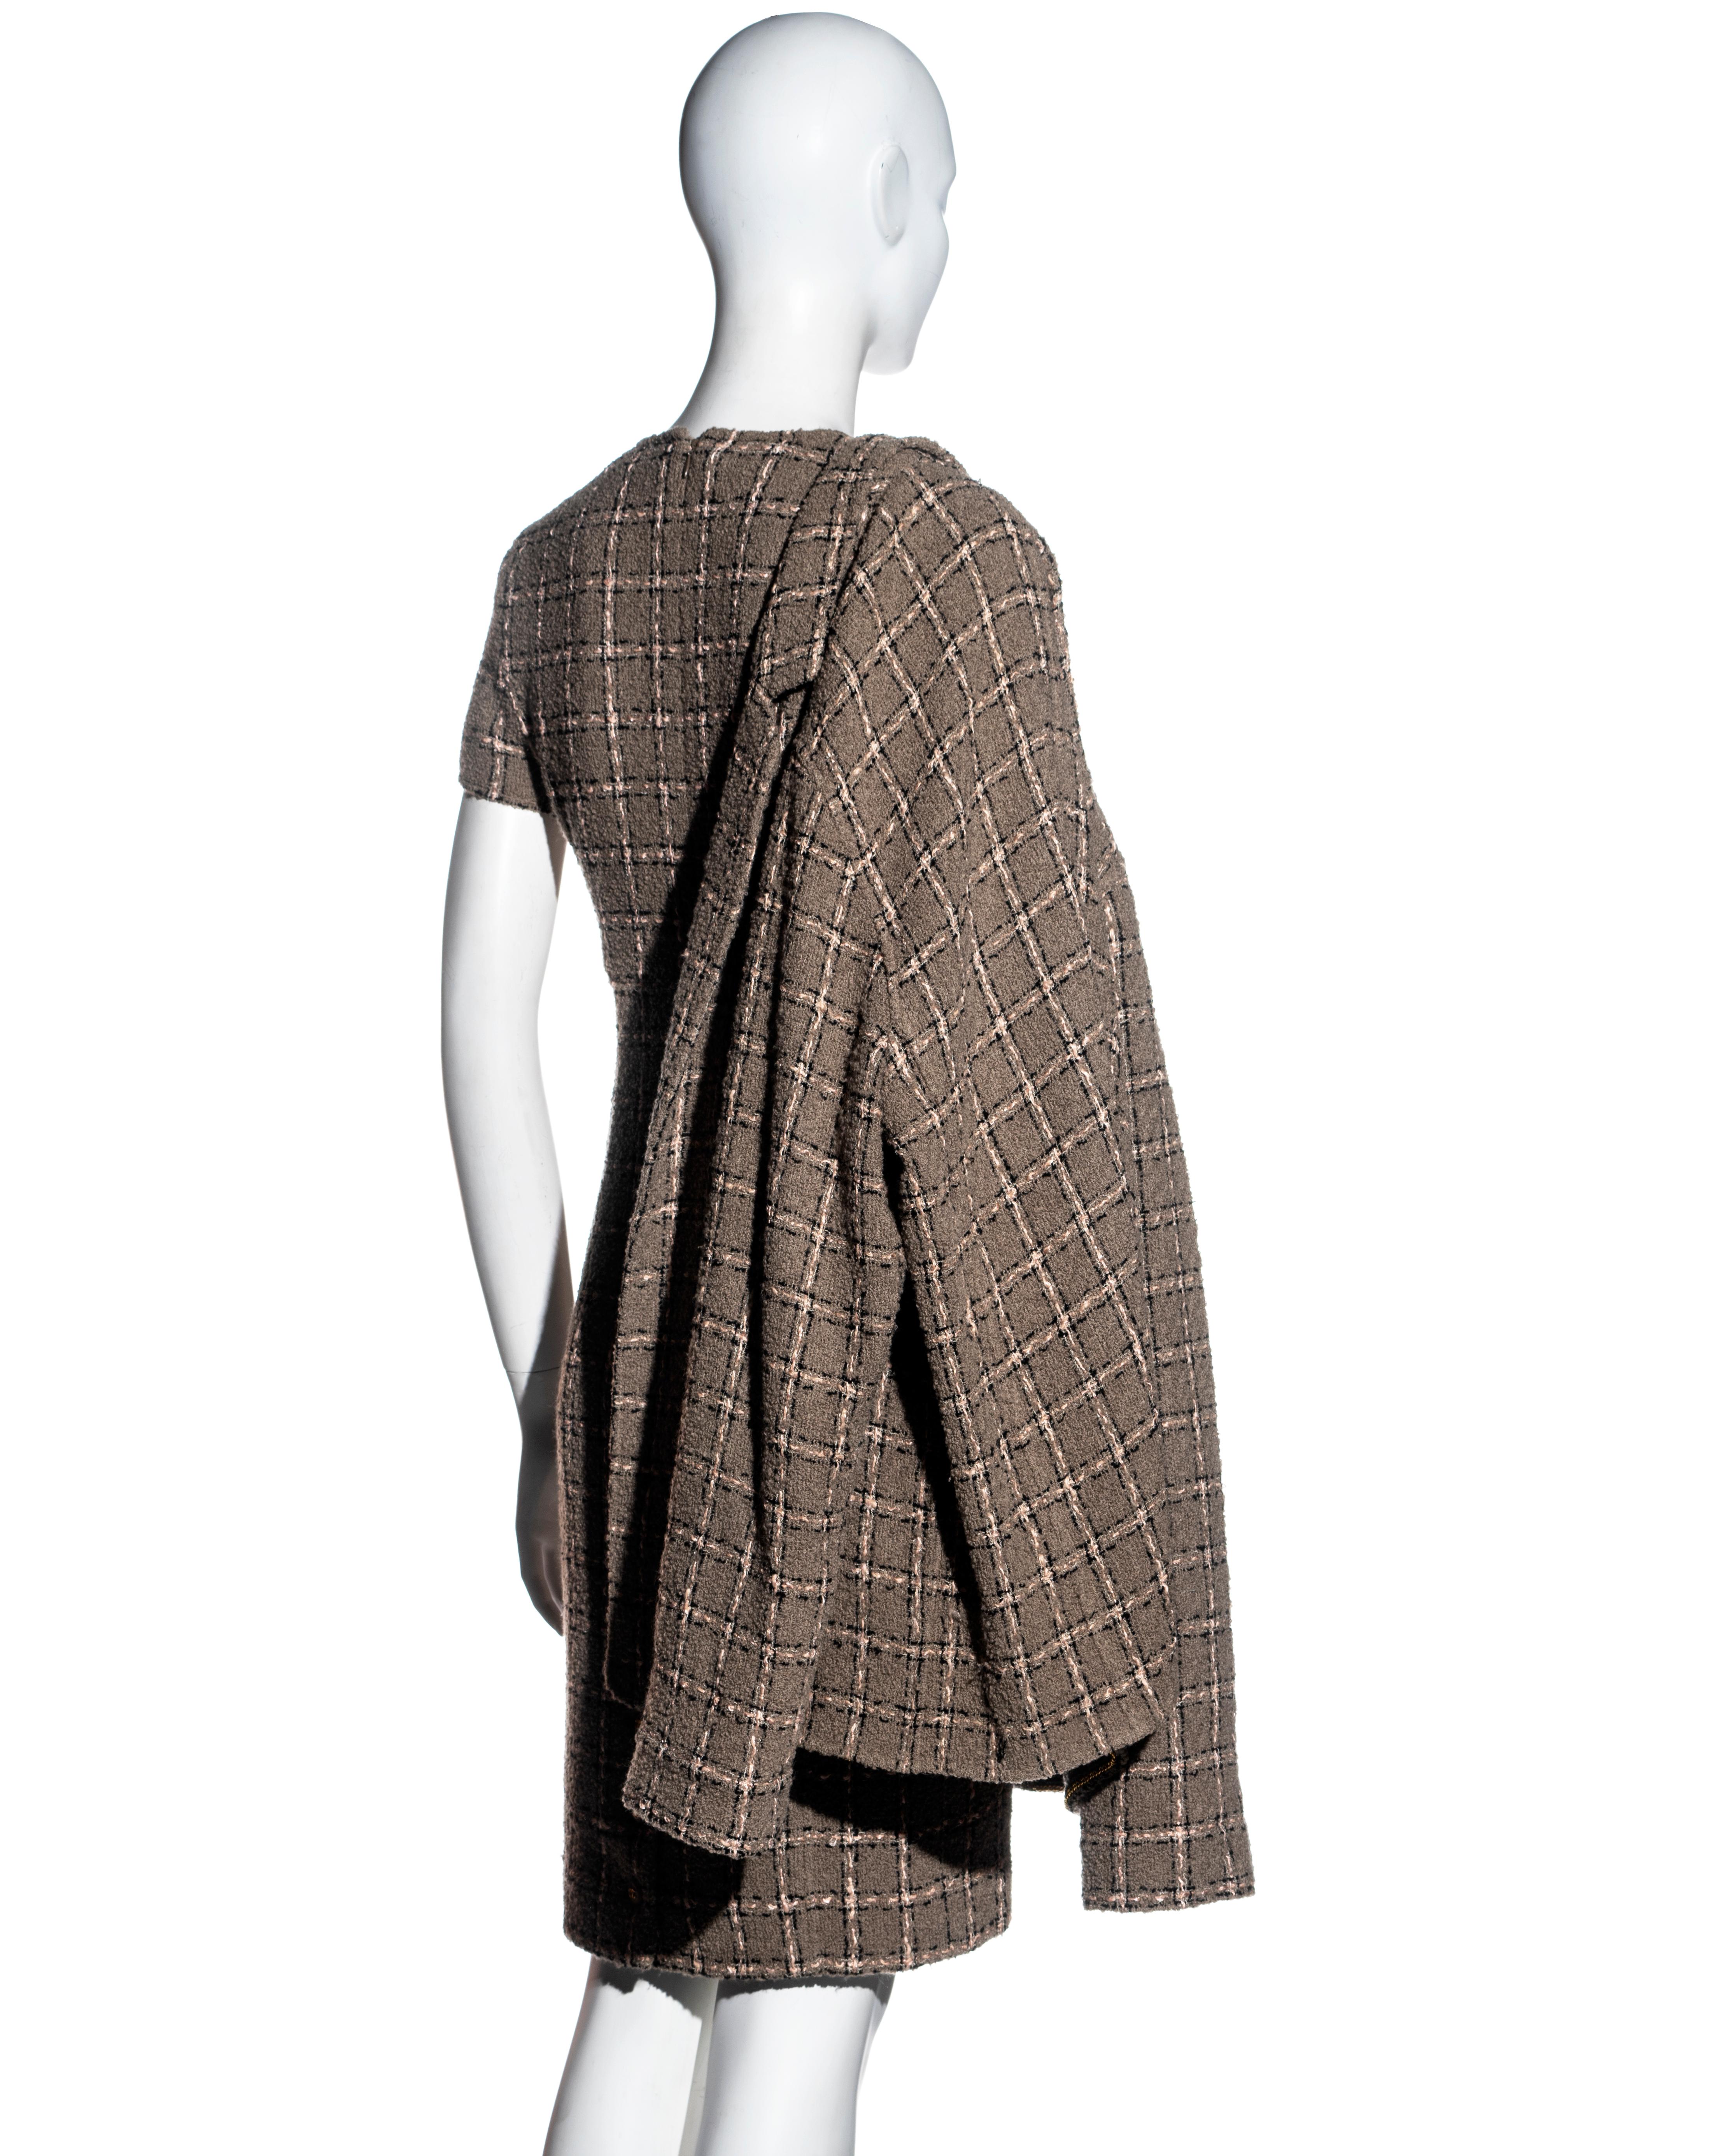 Chanel by Karl Lagerfeld checked taupe bouclé wool dress and jacket set, fw 1995 For Sale 5